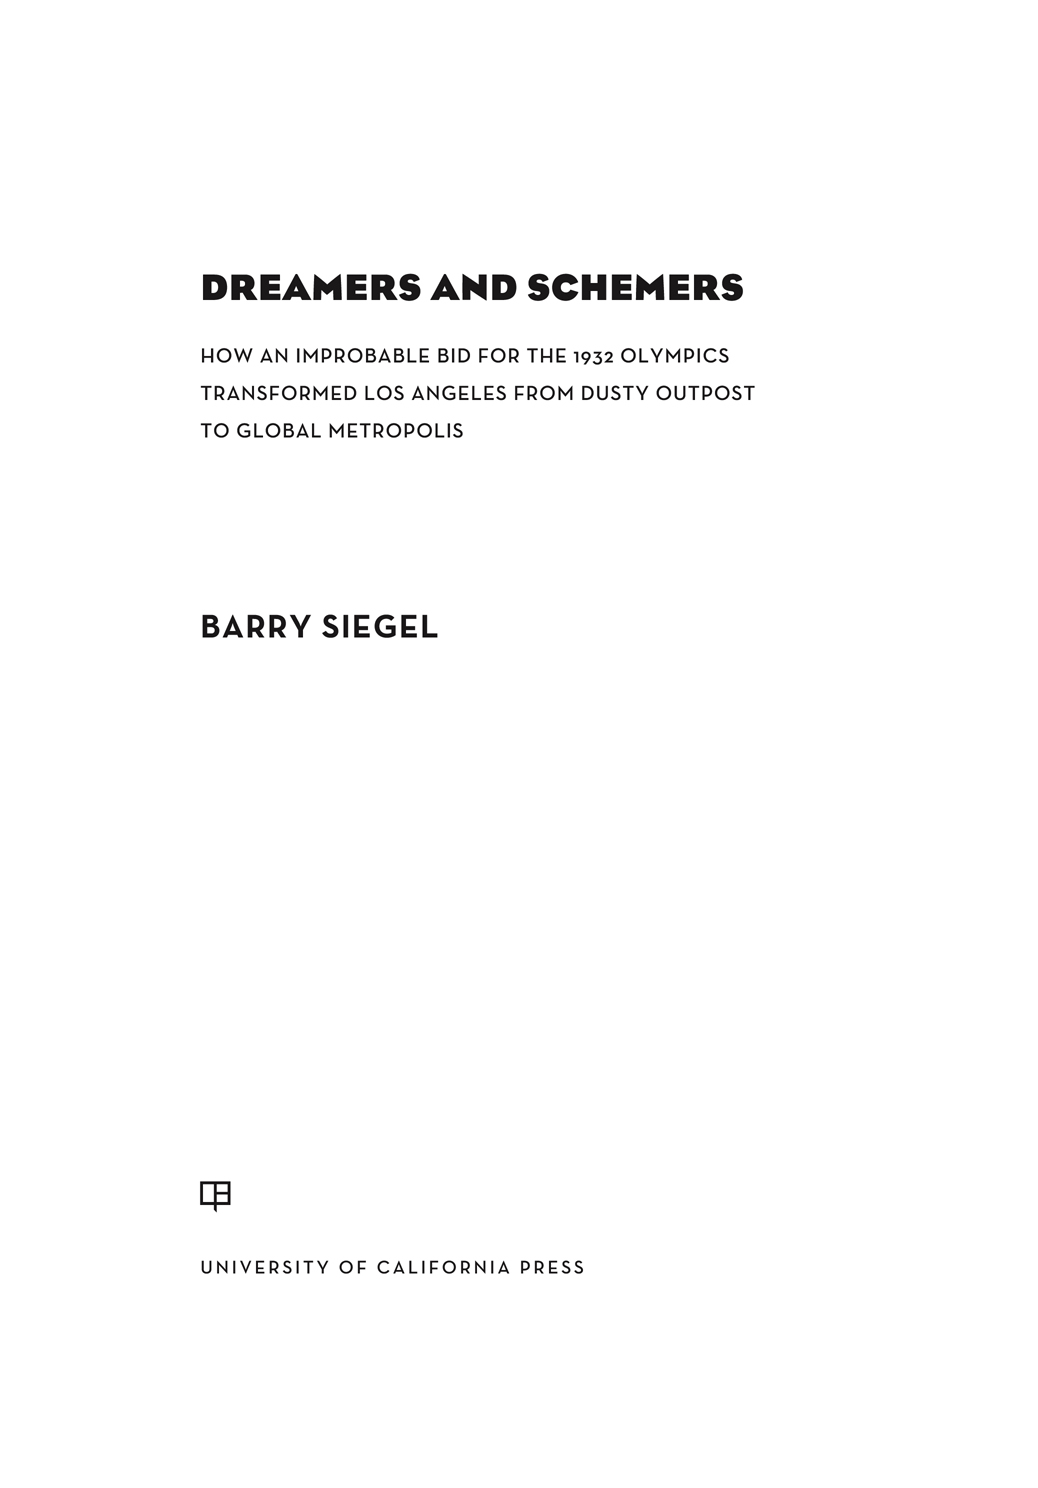 DREAMERS AND SCHEMERS The publisher and the University of California Press - photo 1